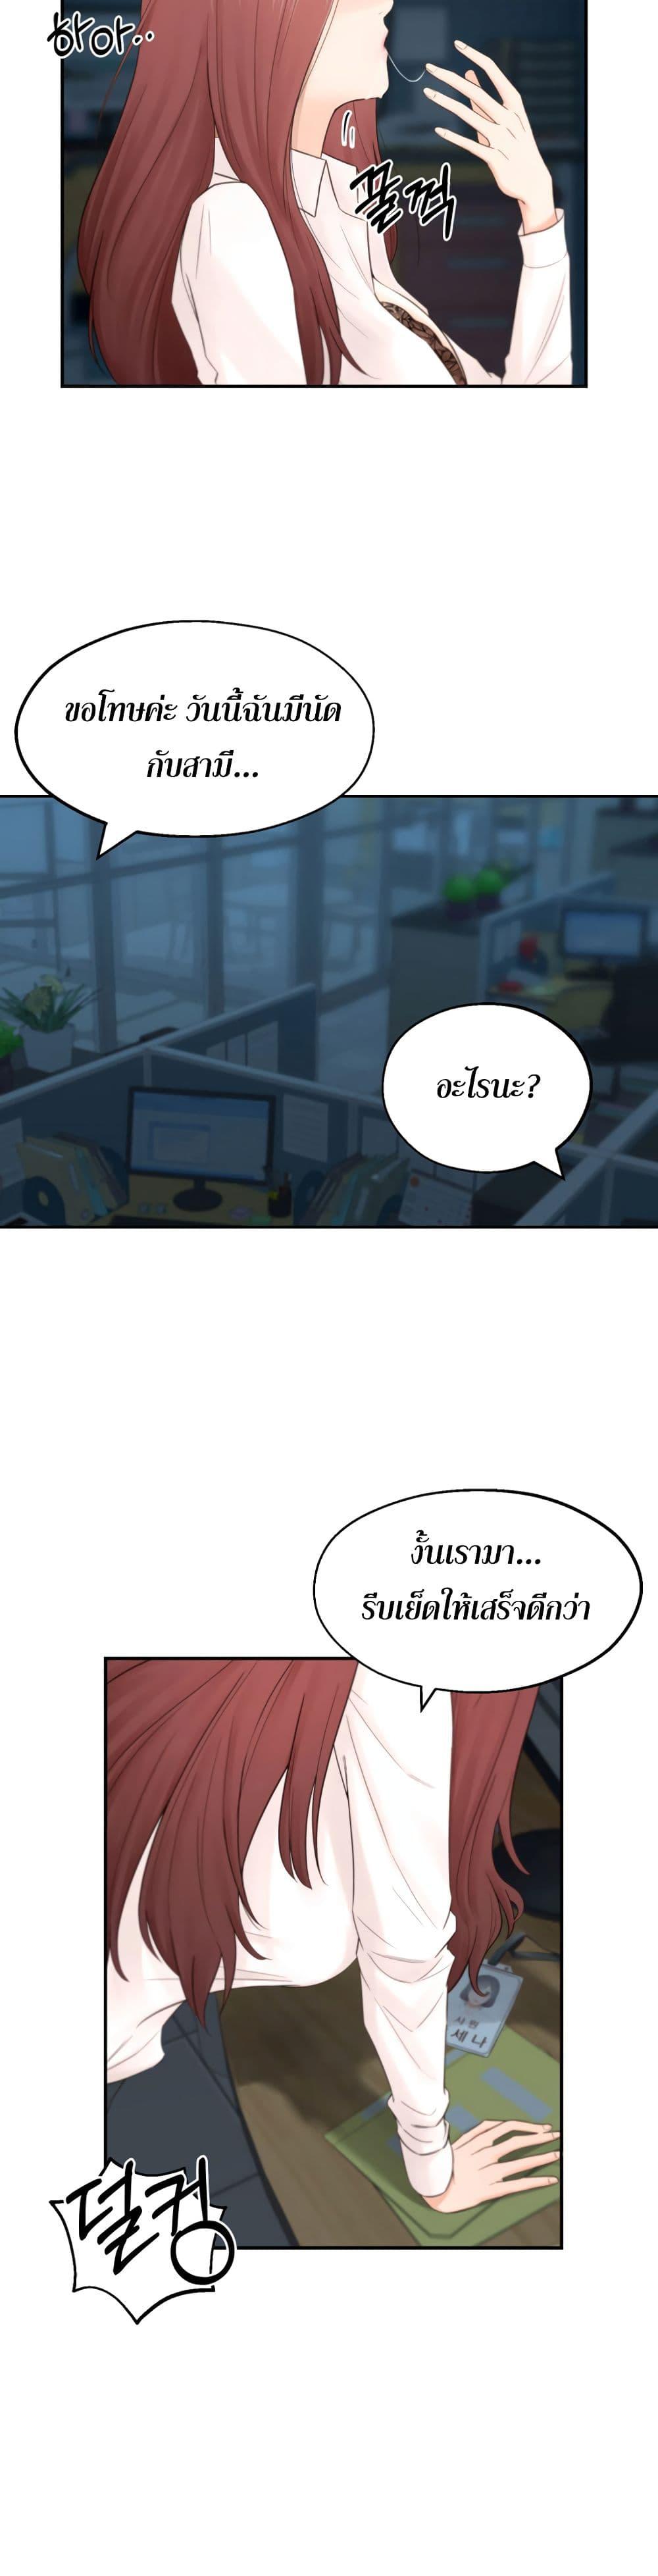 A Knowing Sister 1 ภาพ 12